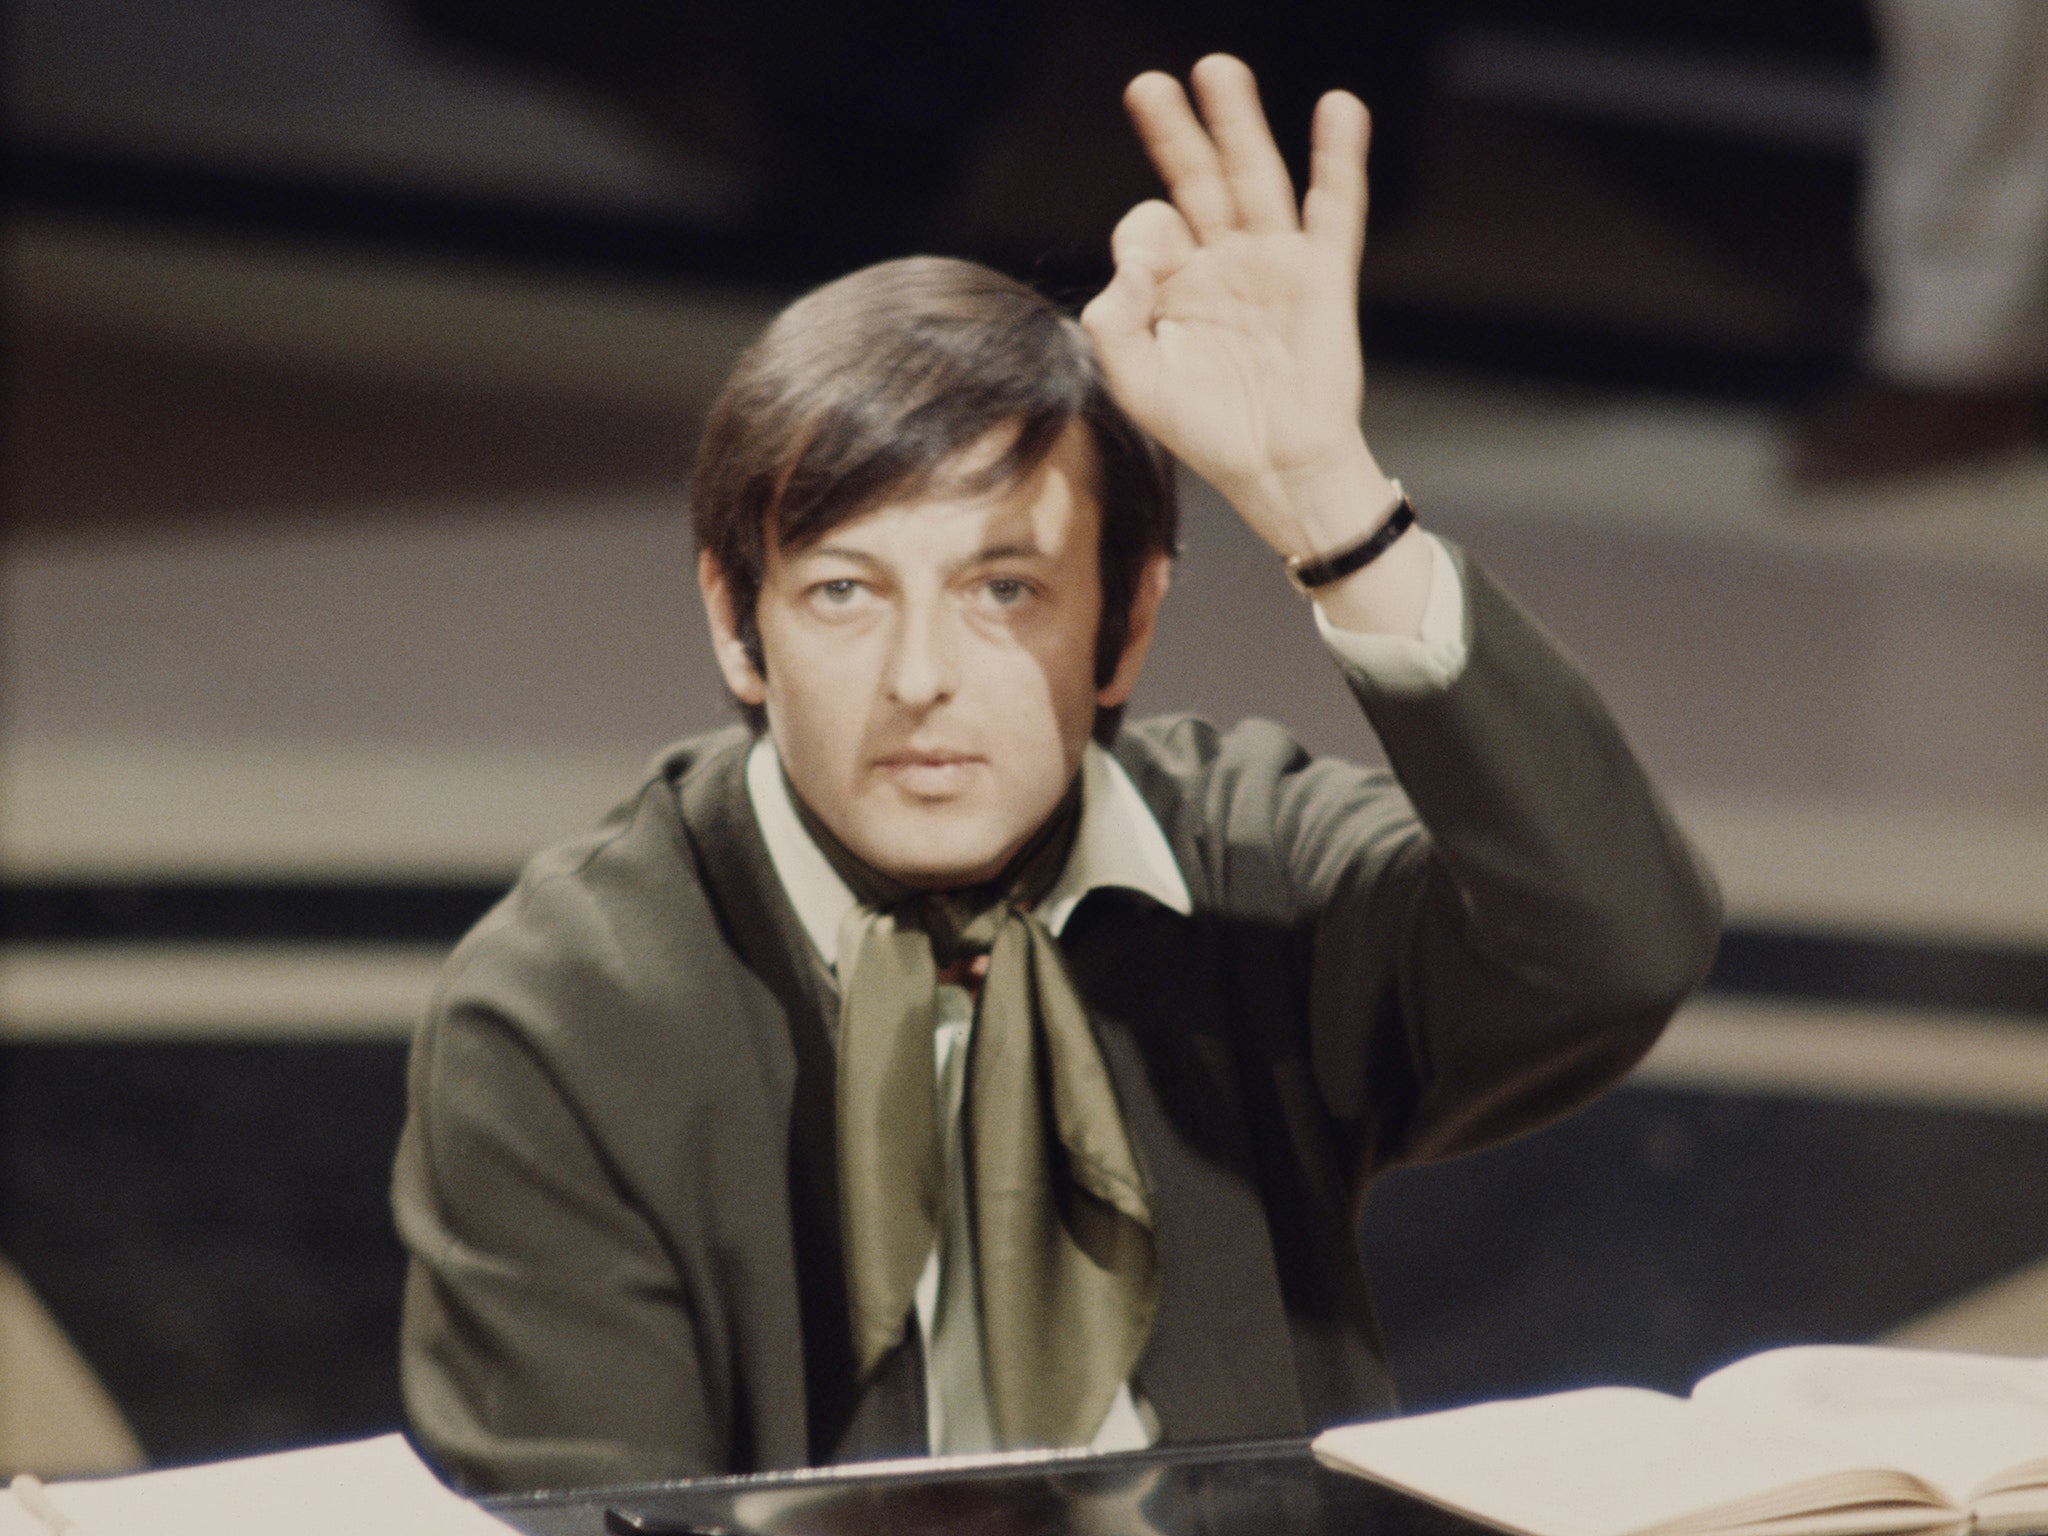 IMG ANDRE PREVIN, Andreas Ludwig Priwin, German-born American Pianist, Conductor, and Composer